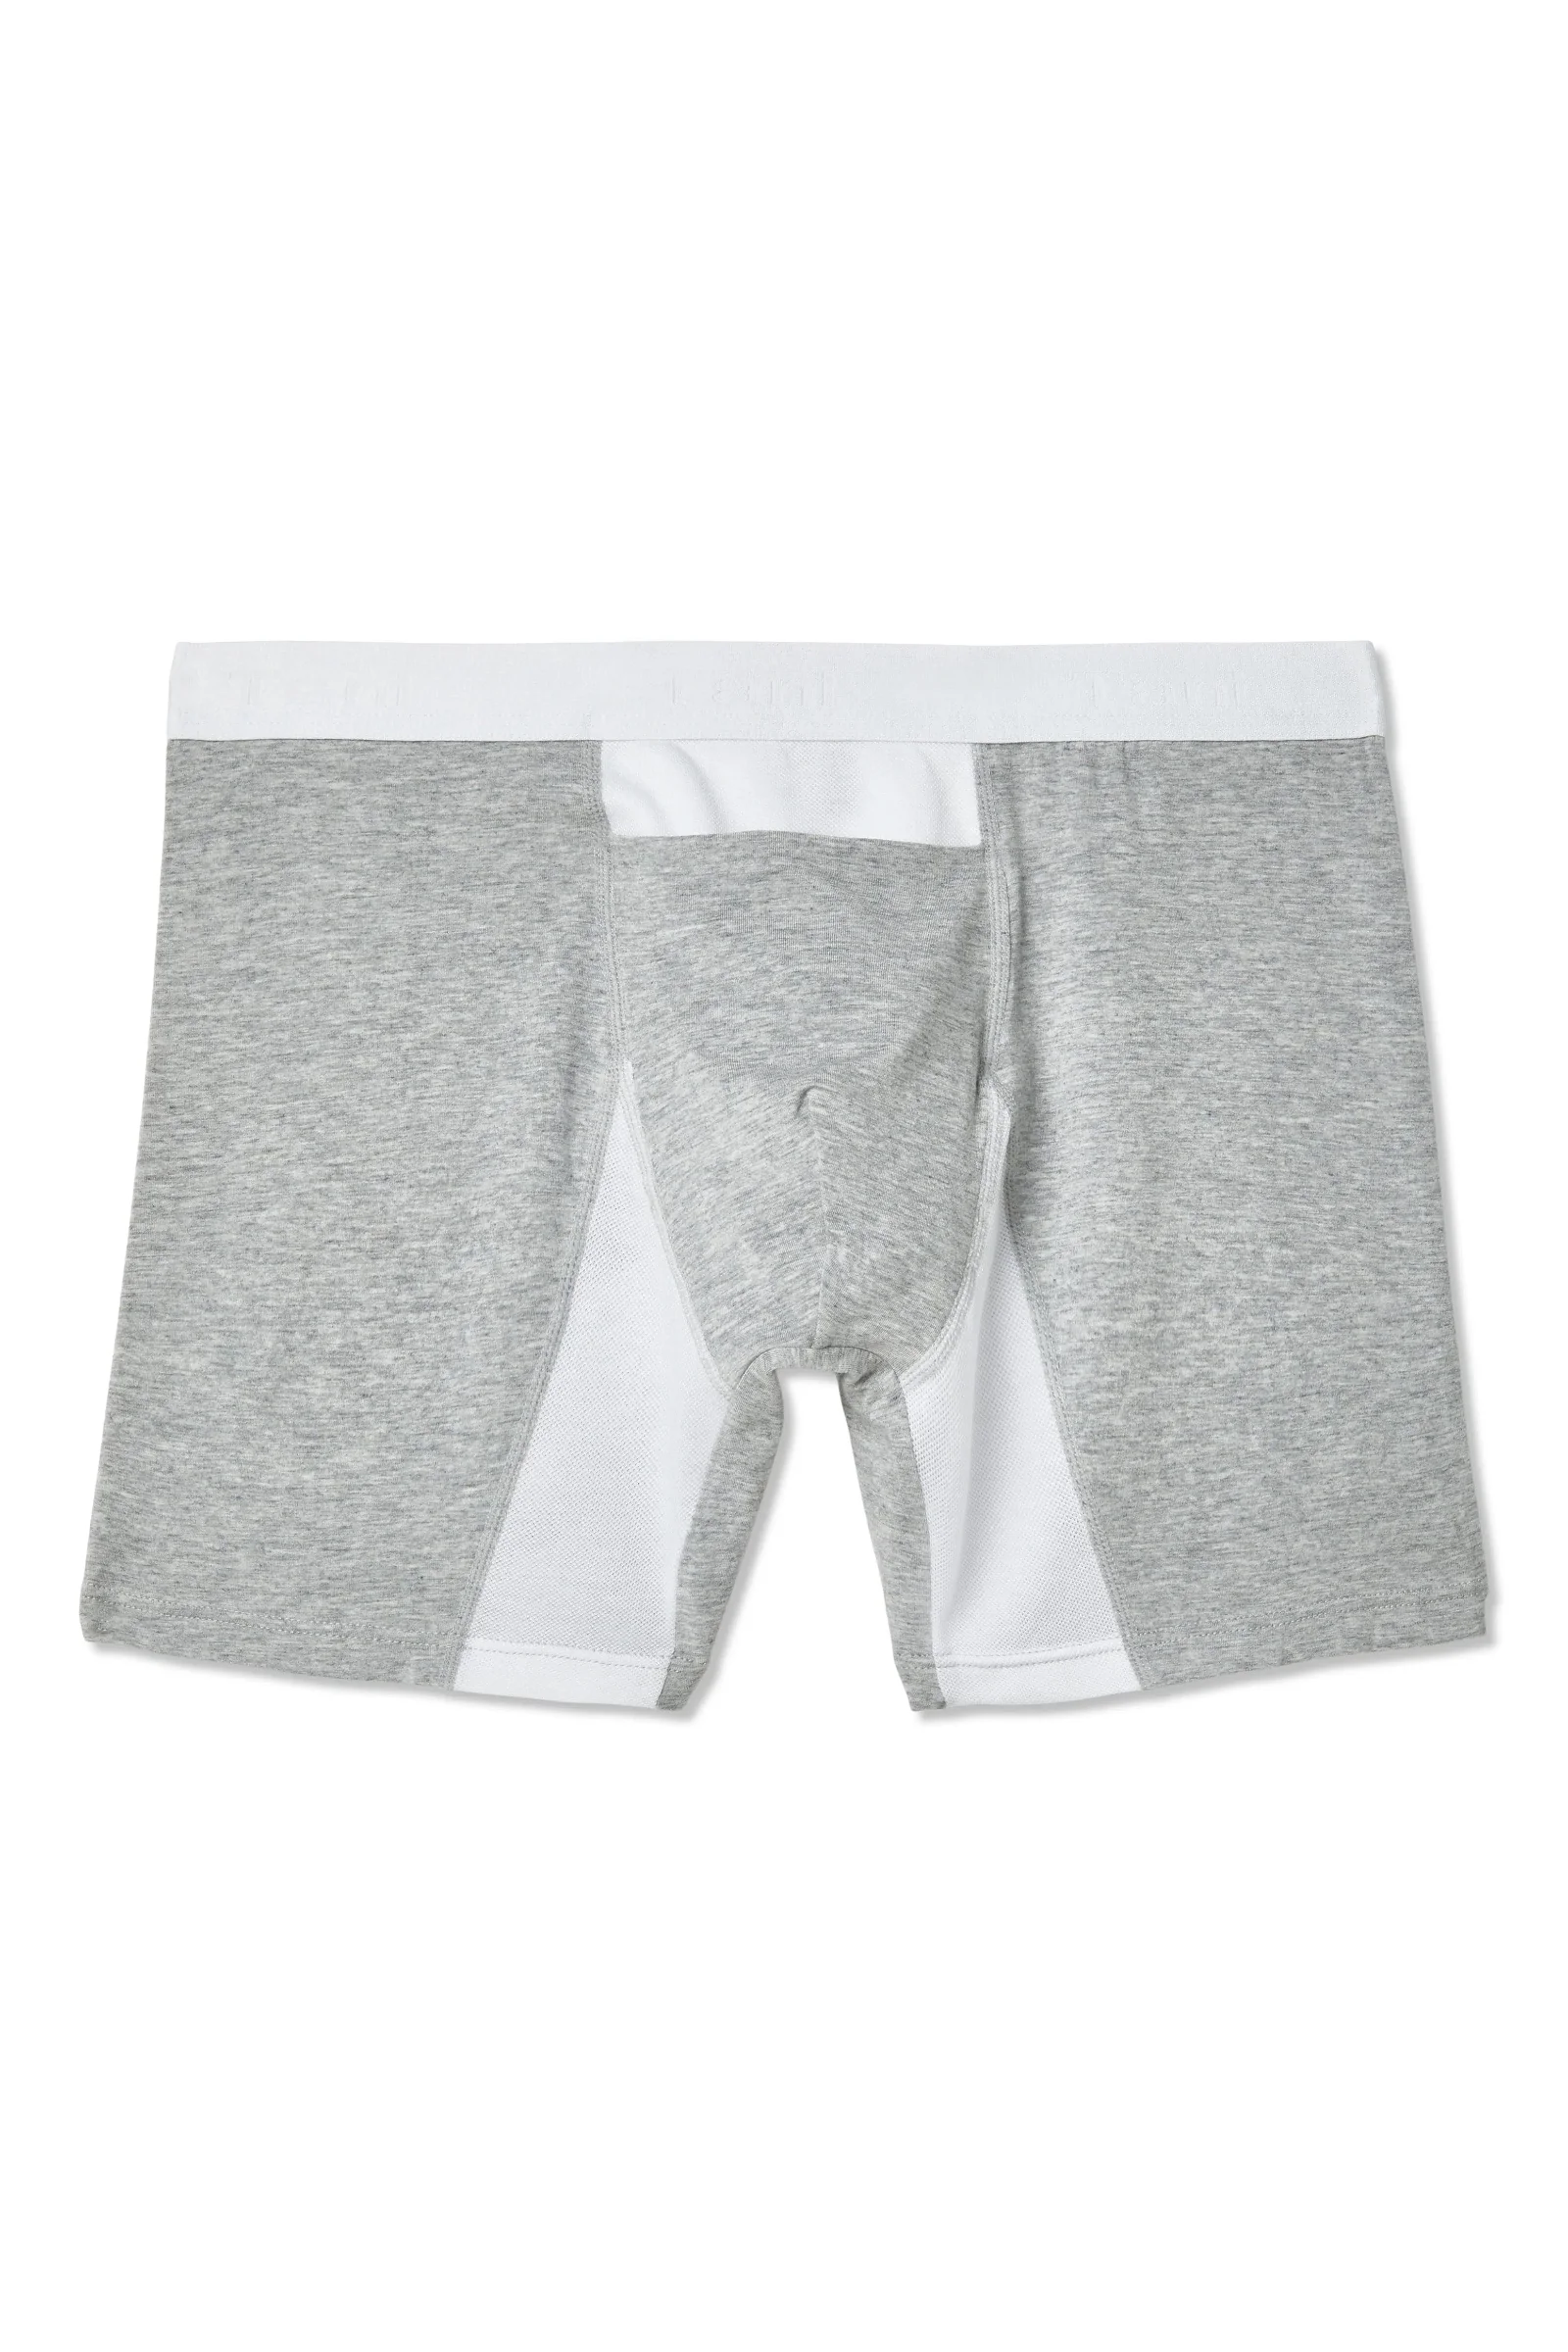 Image of Men's Hybrid Boxer Brief with Horizontal Fly